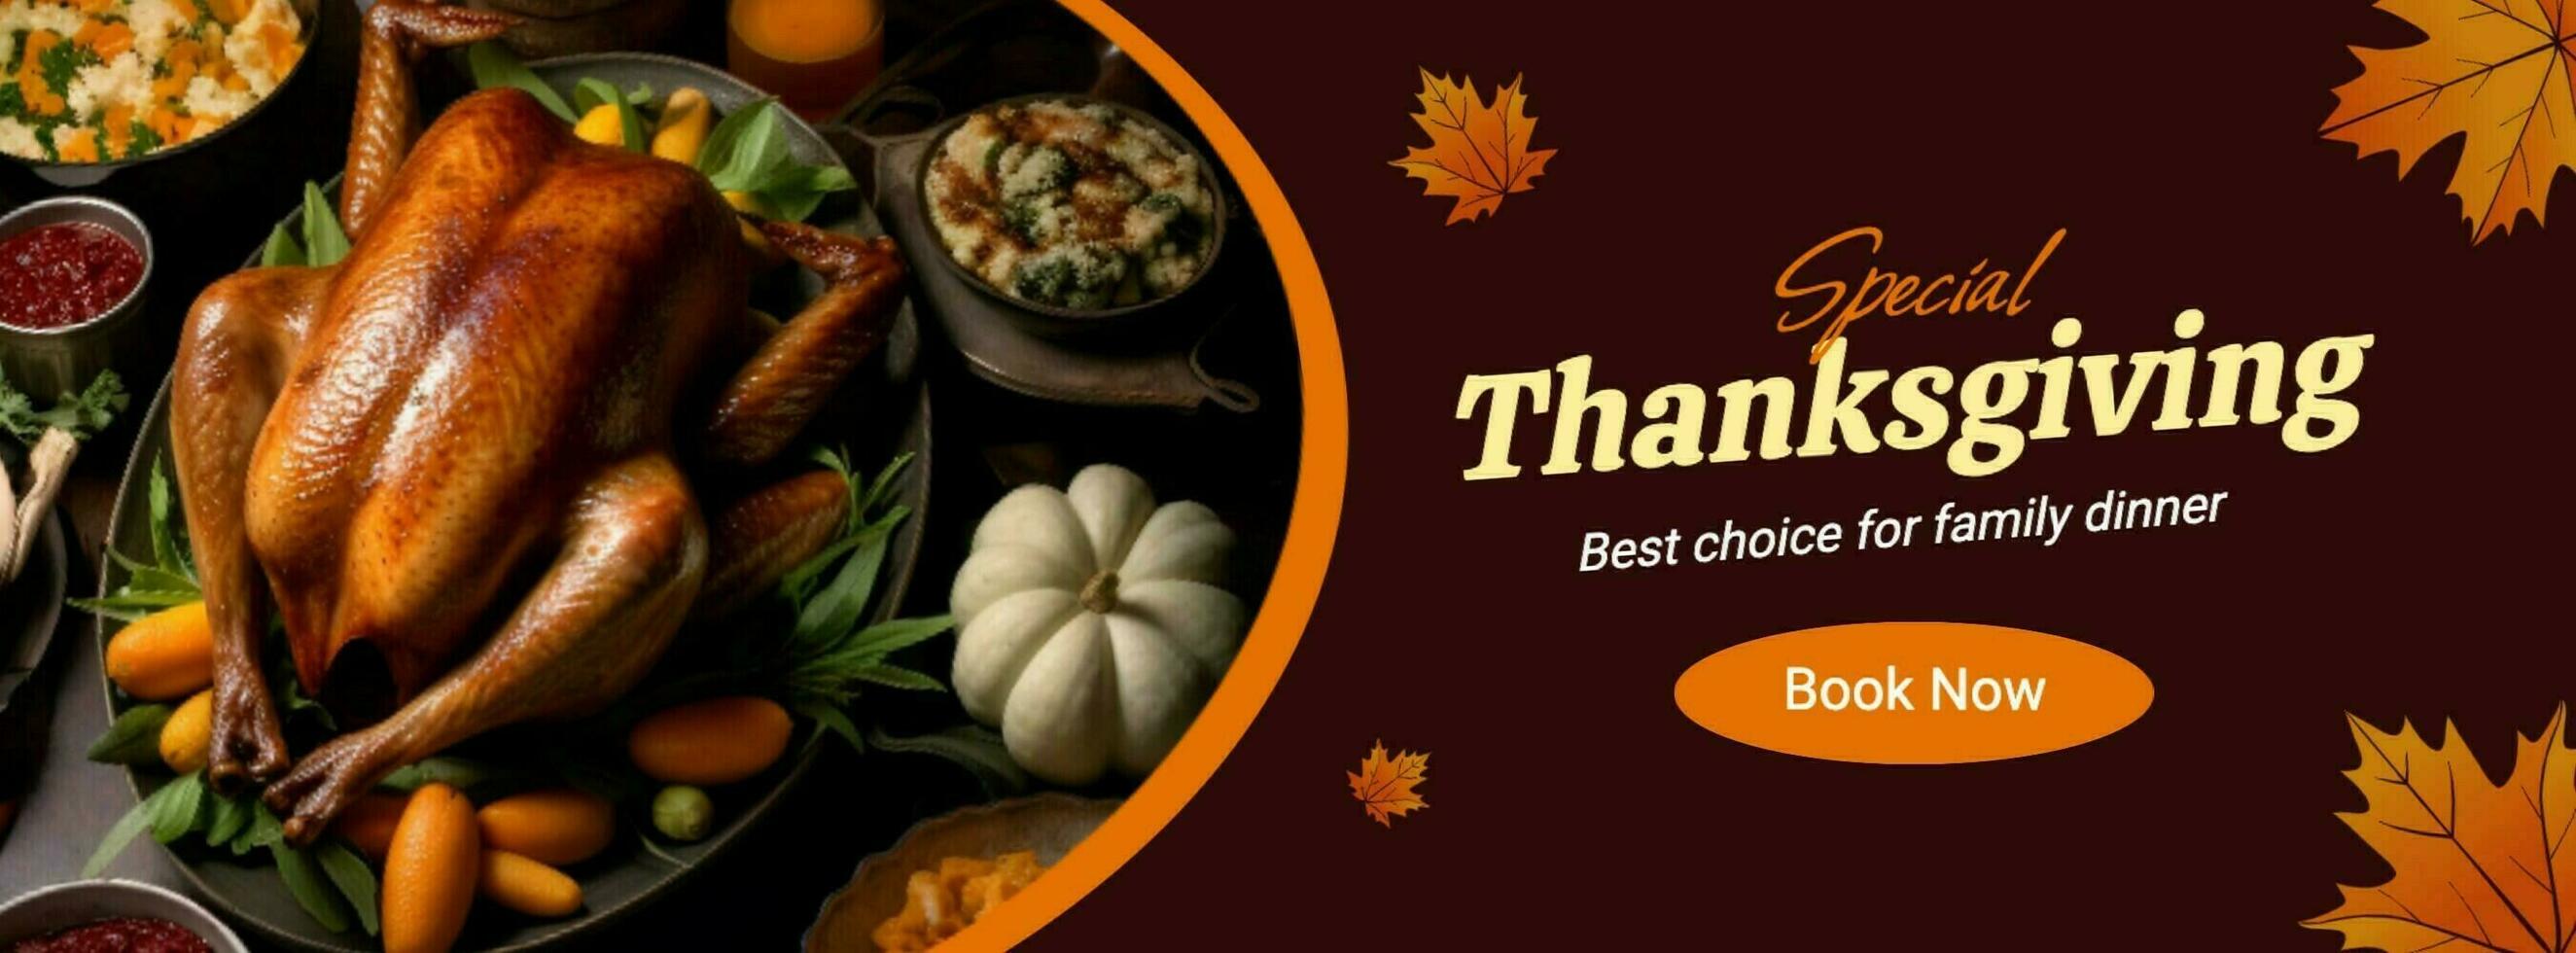 Brown Special Thanksgiving Restaurant Facebook Cover template